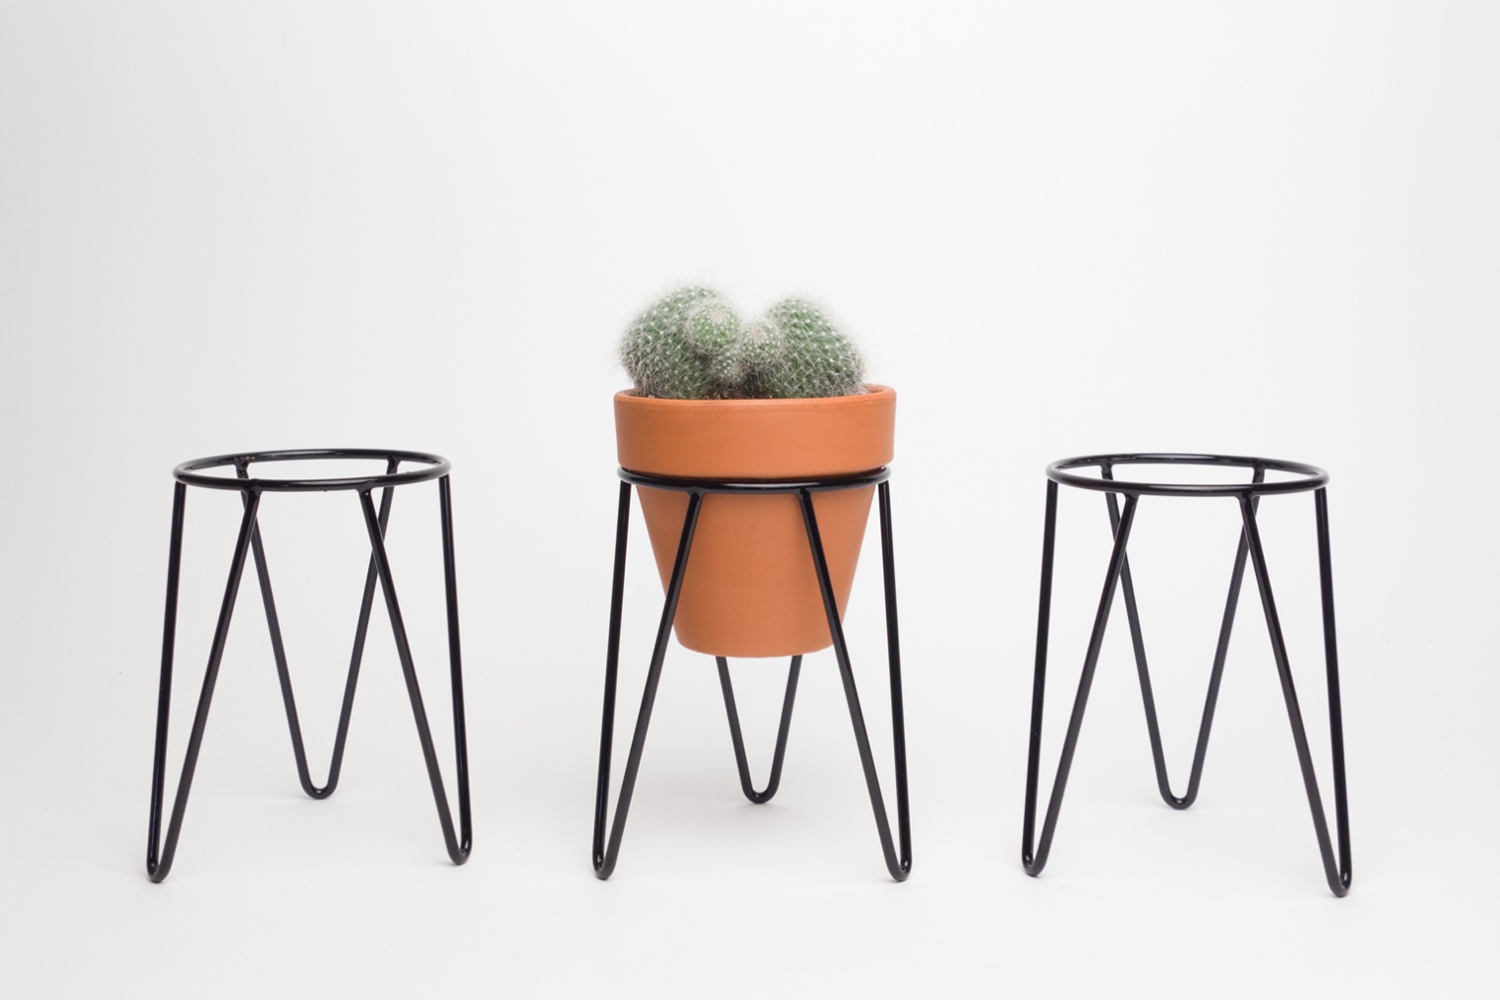 Mini Hairpin Wire Plant Stands and Terracotta Pot with Mammillaria Cactus